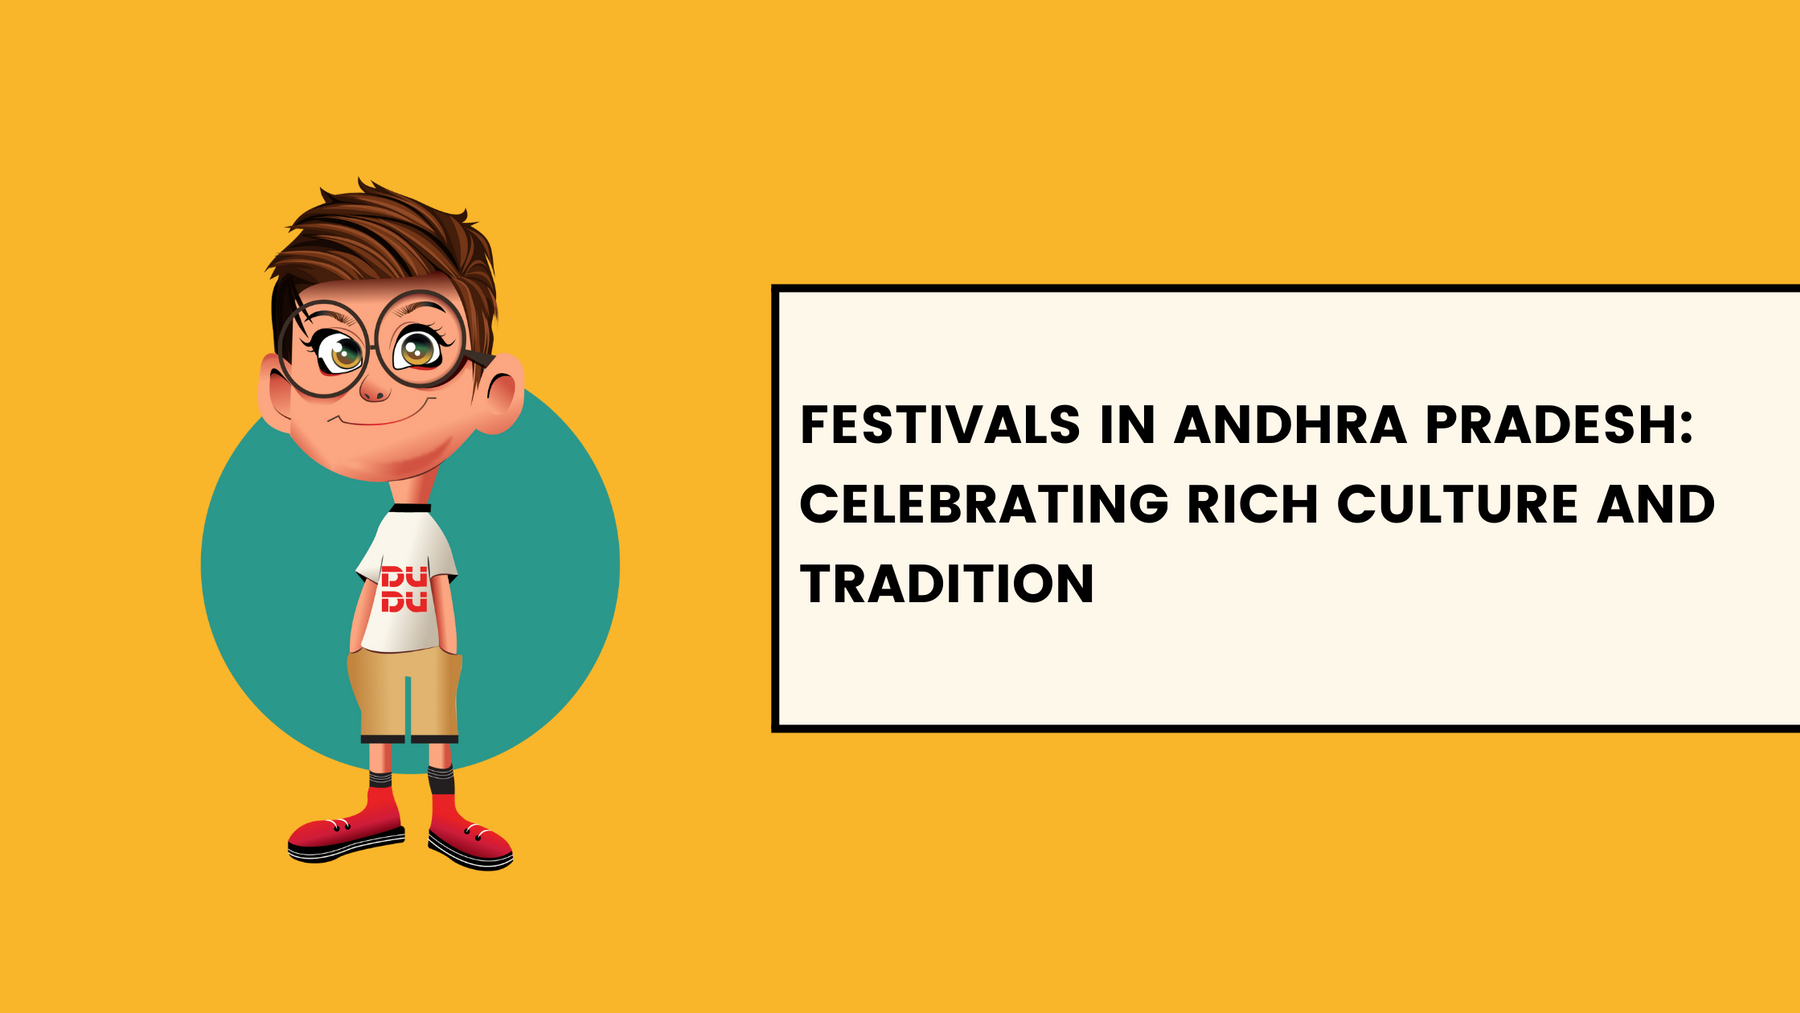 Festivals In Andhra Pradesh: Celebrate Rich Cultural Traditions And Joyous Occasions